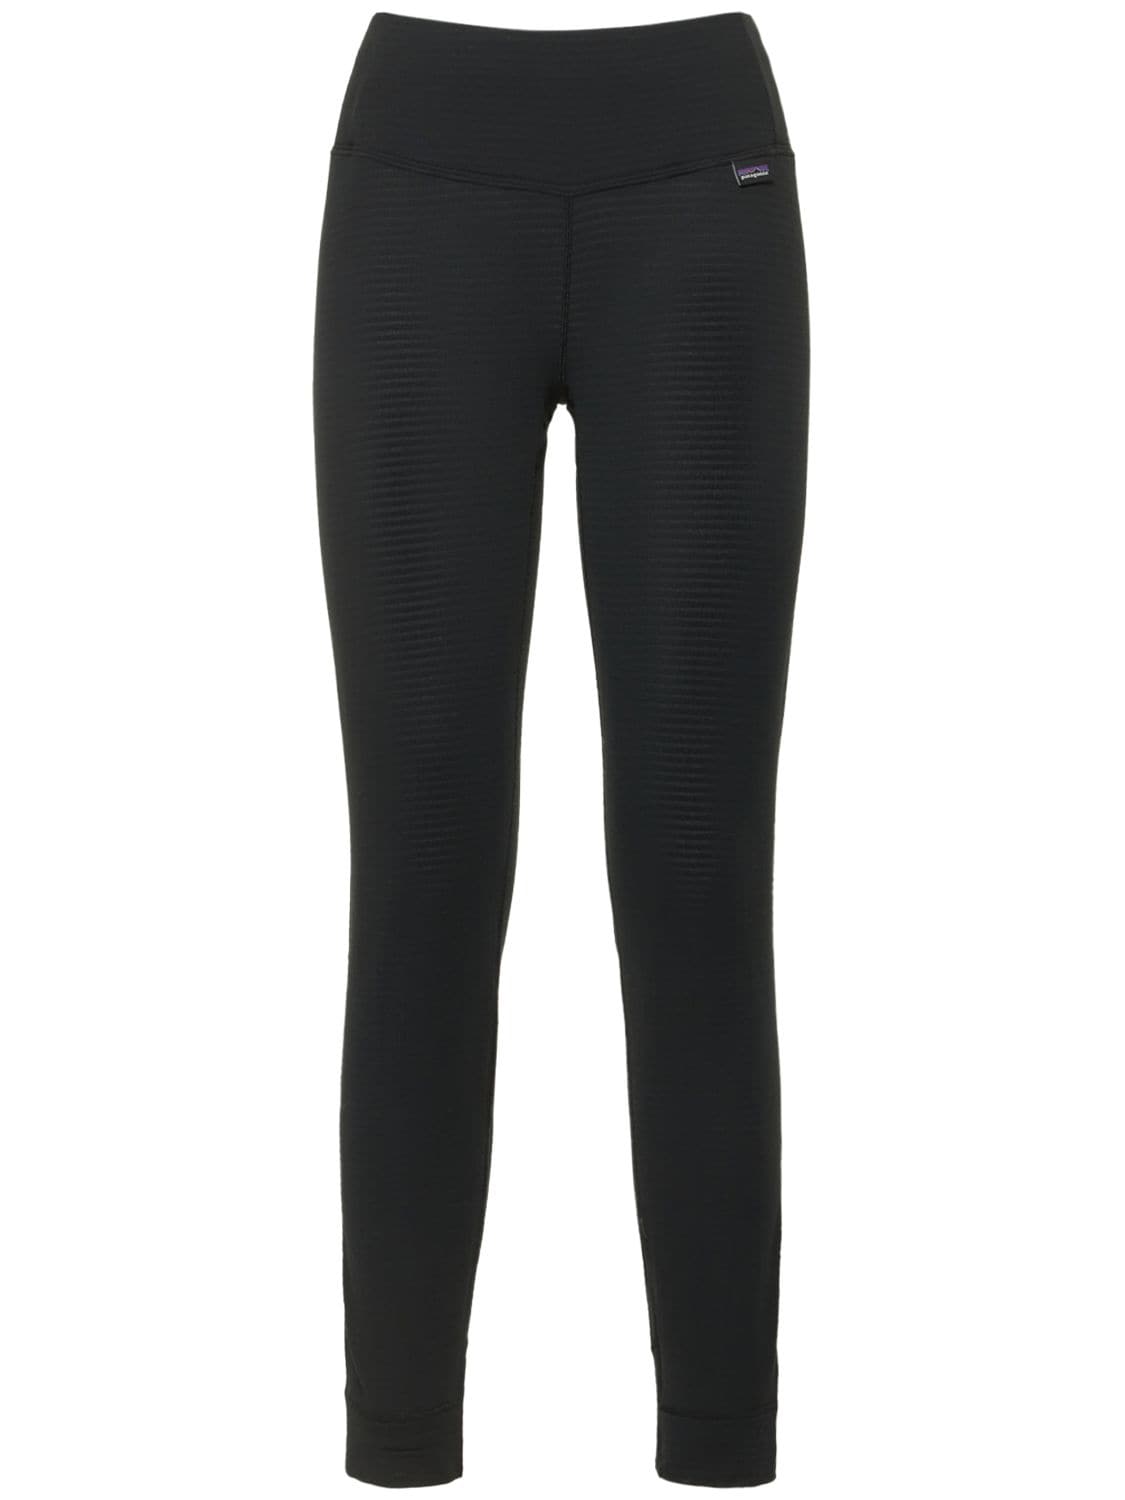 Patagonia Capilene Thermal Weight Tights